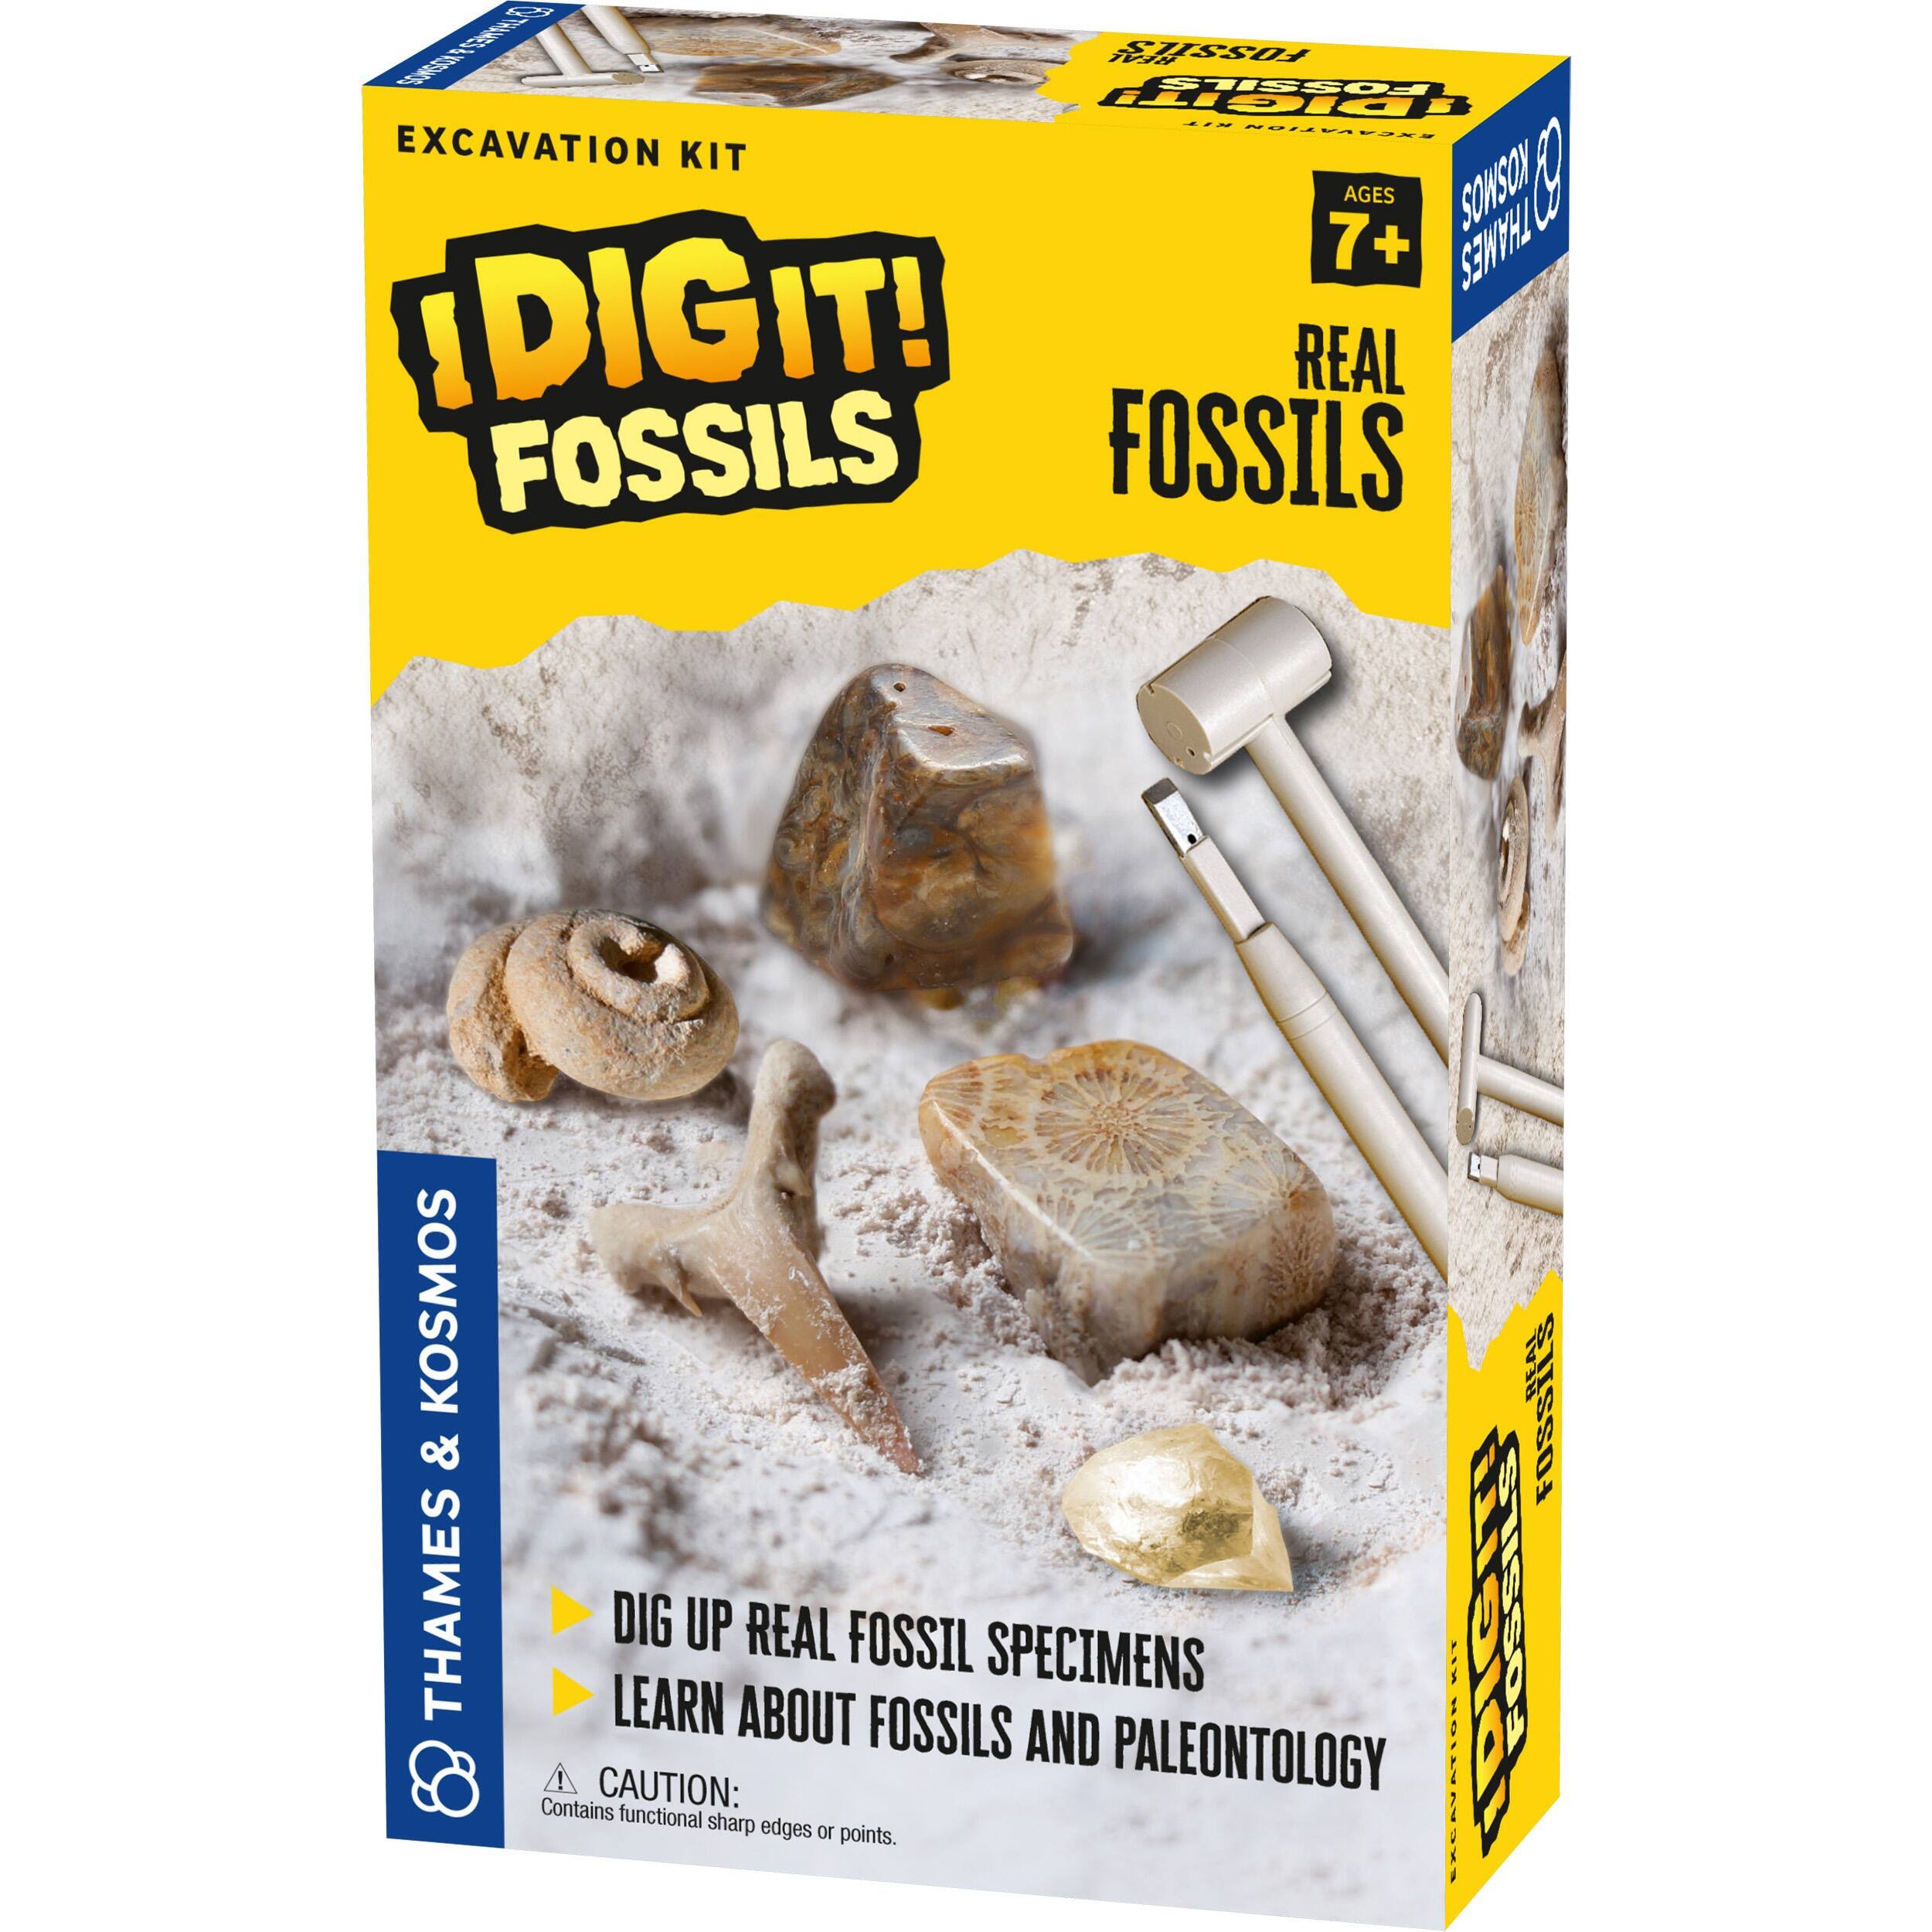 (Real Fossils) - I Dig It! Fossils - Real Fossils Excavation Kit